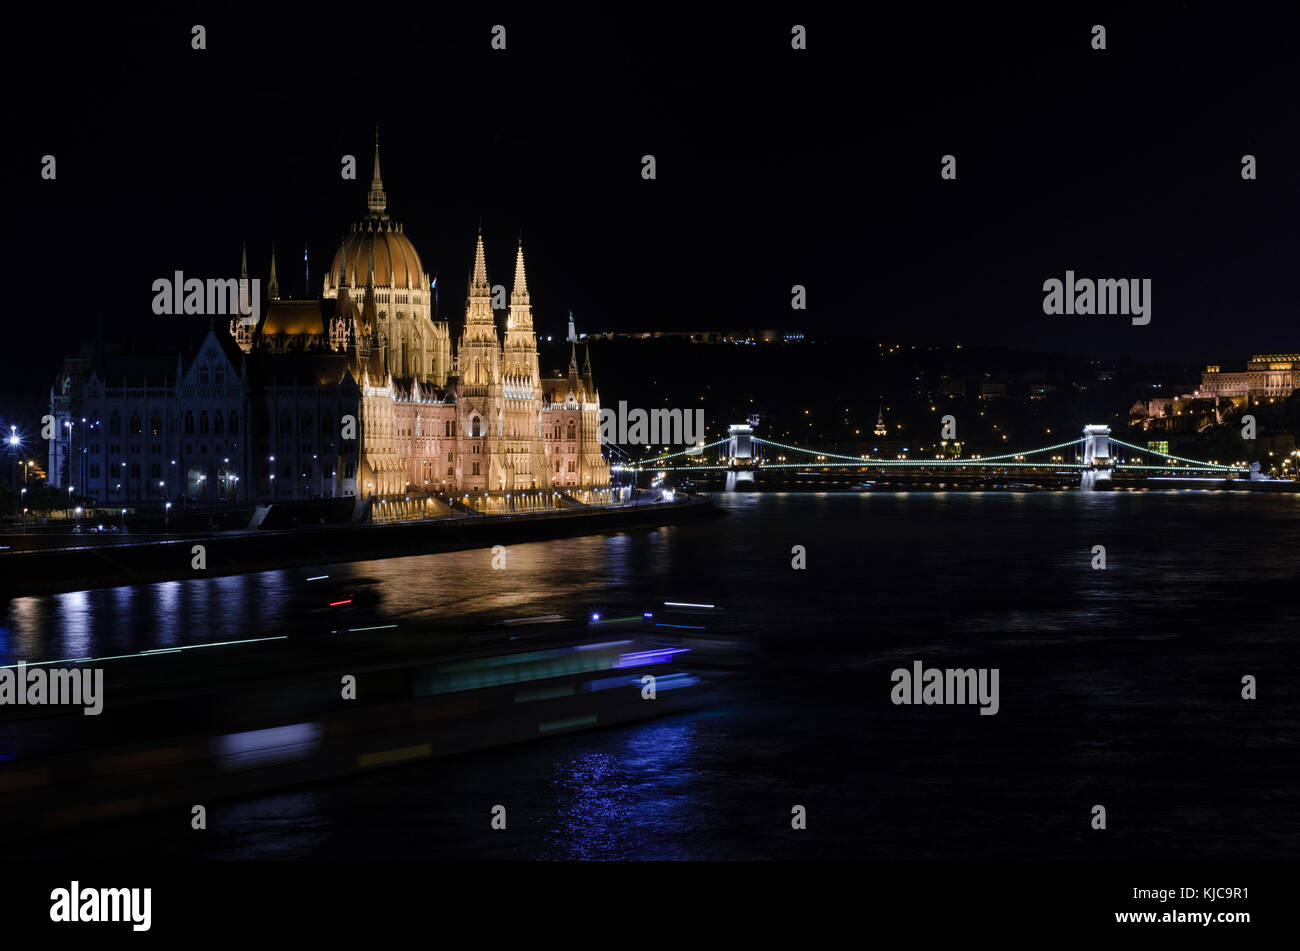 The Hungarian Parliament, Országház, and the Széchenyi Lánchíd bridge lit at night and looking over the Danube river, with a barge passing. Stock Photo